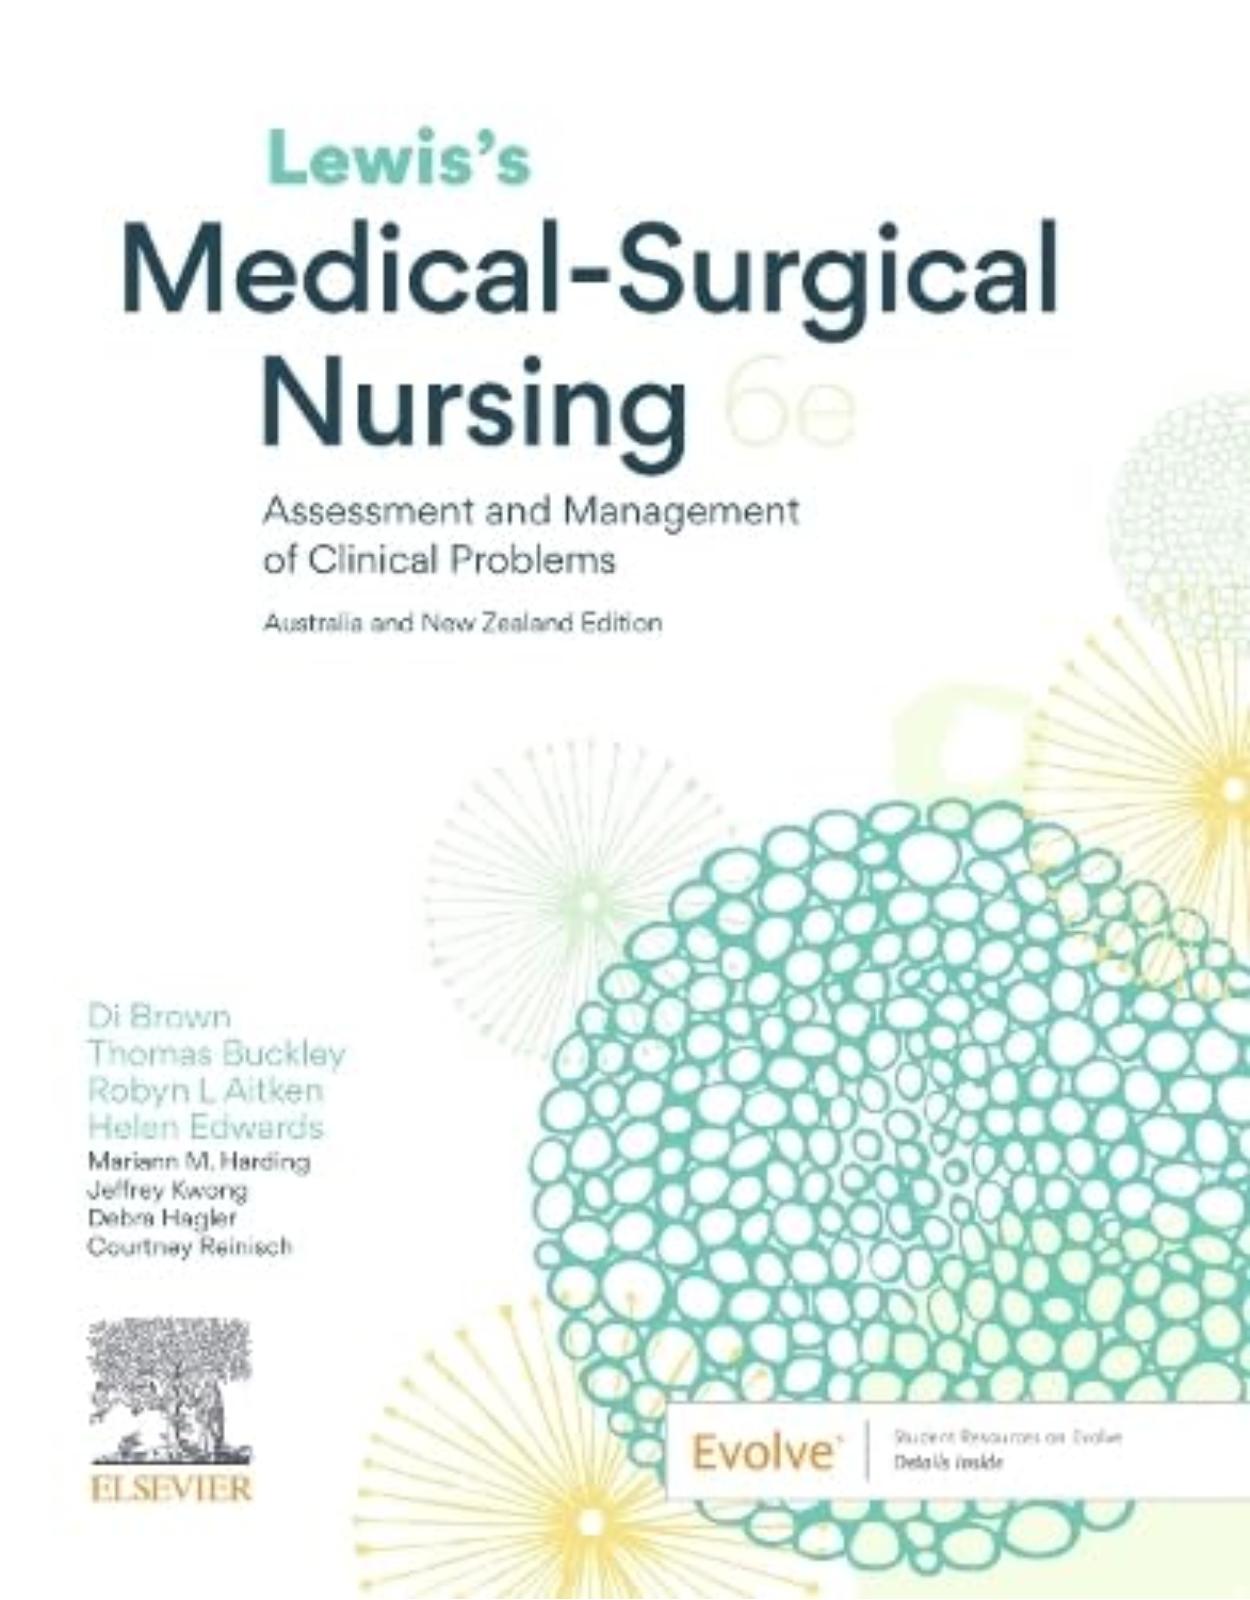 Lewis’s Medical-Surgical Nursing:Assessment and Management of Clinical Problems, 6th Edition